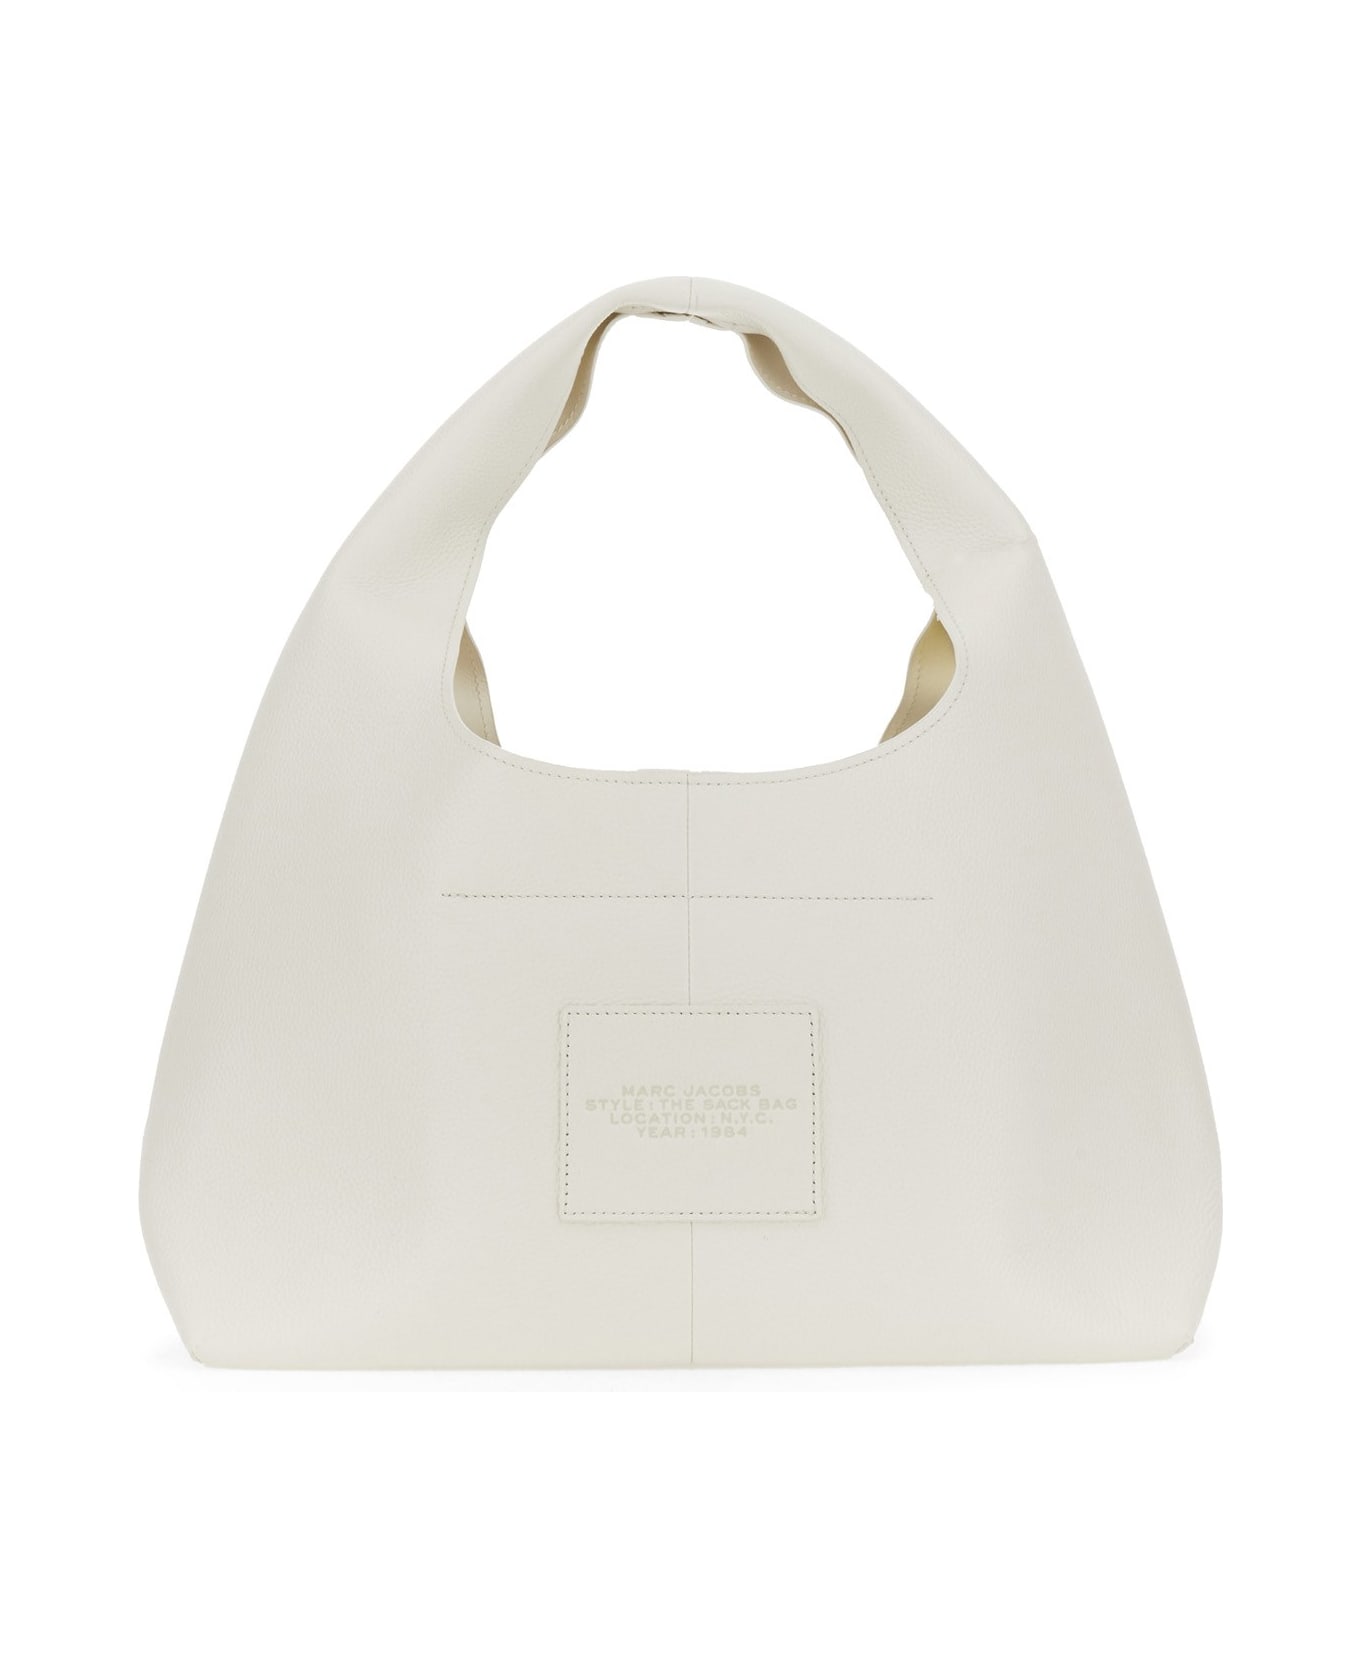 Marc Jacobs The Sack Bag - White トートバッグ